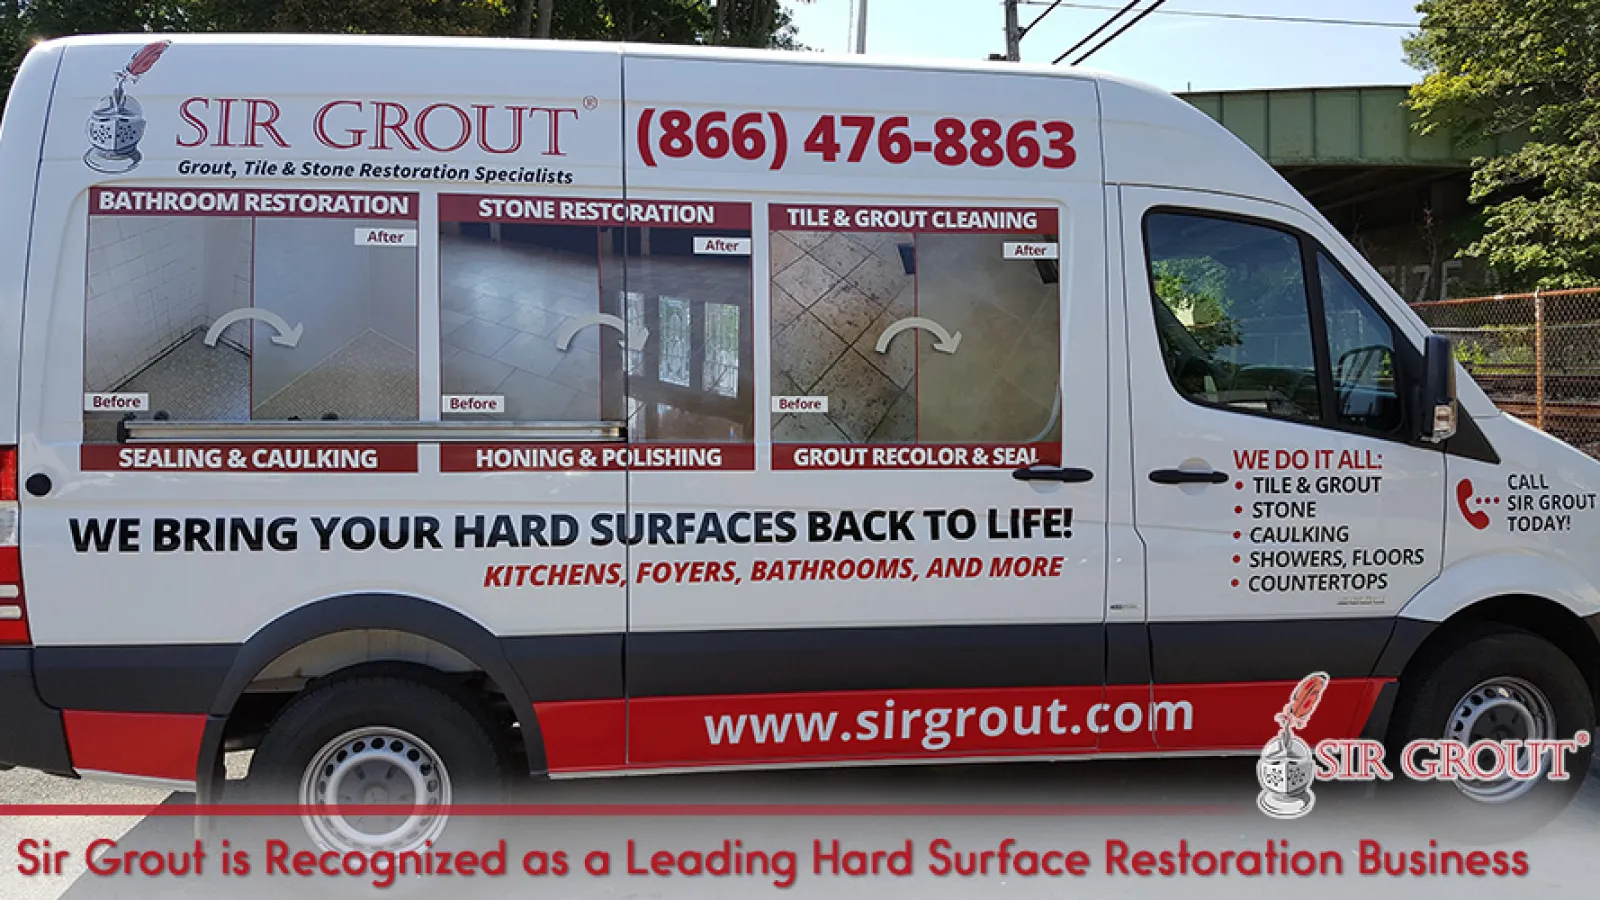 5 Reasons a Sir Grout Franchise is a Worthy Investment